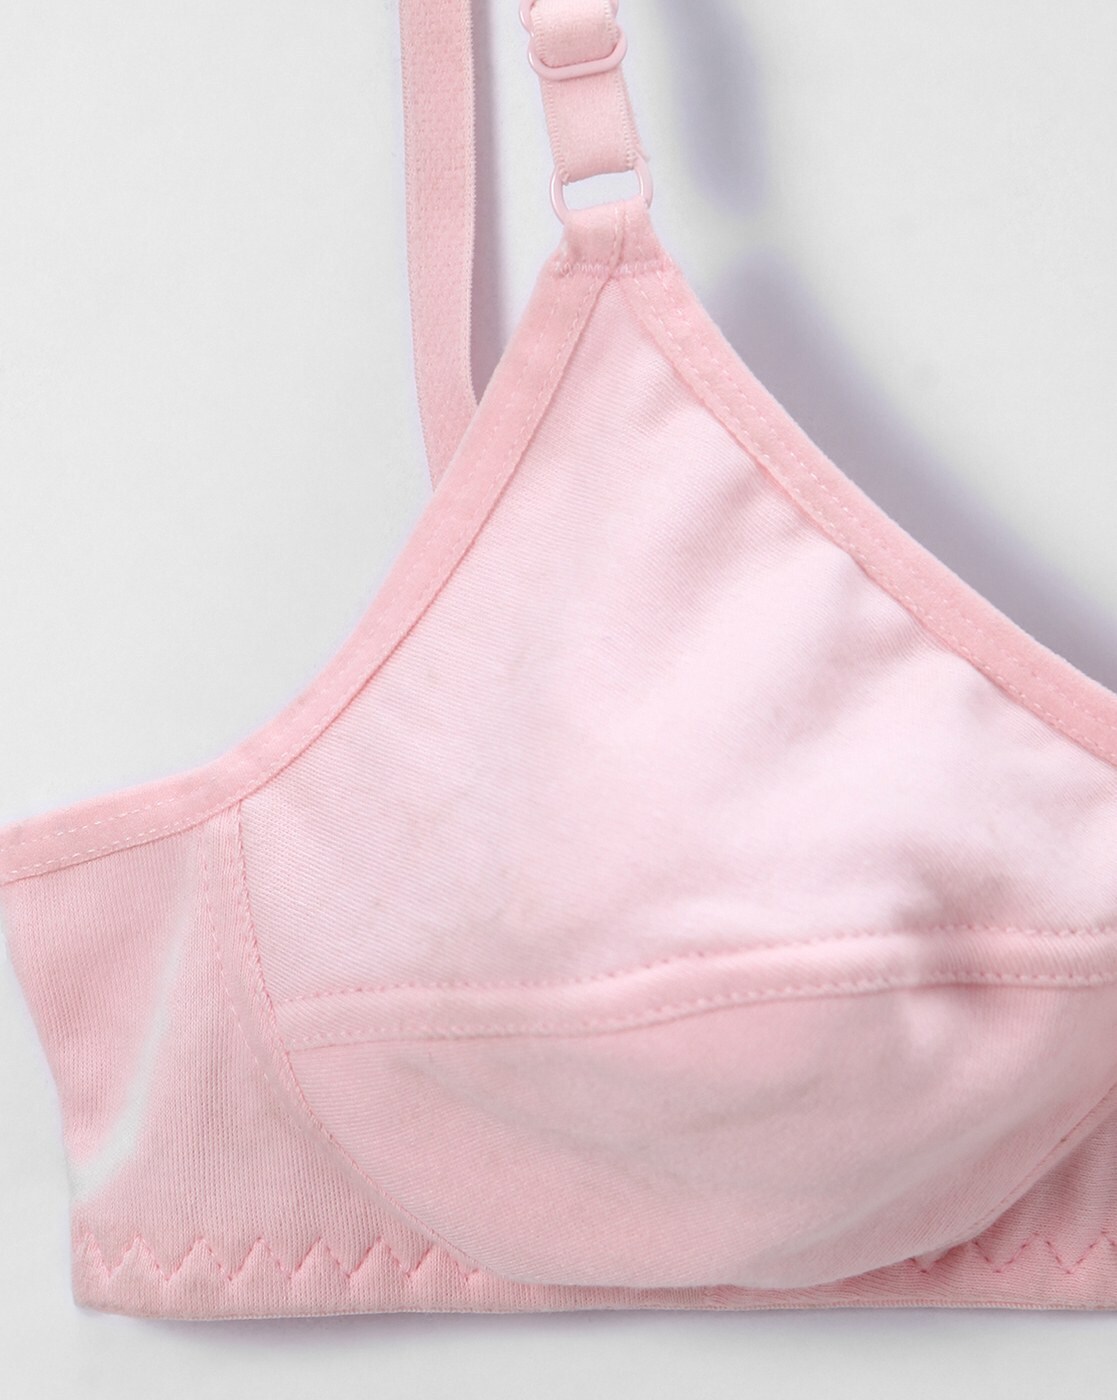 Shyle S Pink Sports Bra in Jaipur - Dealers, Manufacturers & Suppliers -  Justdial